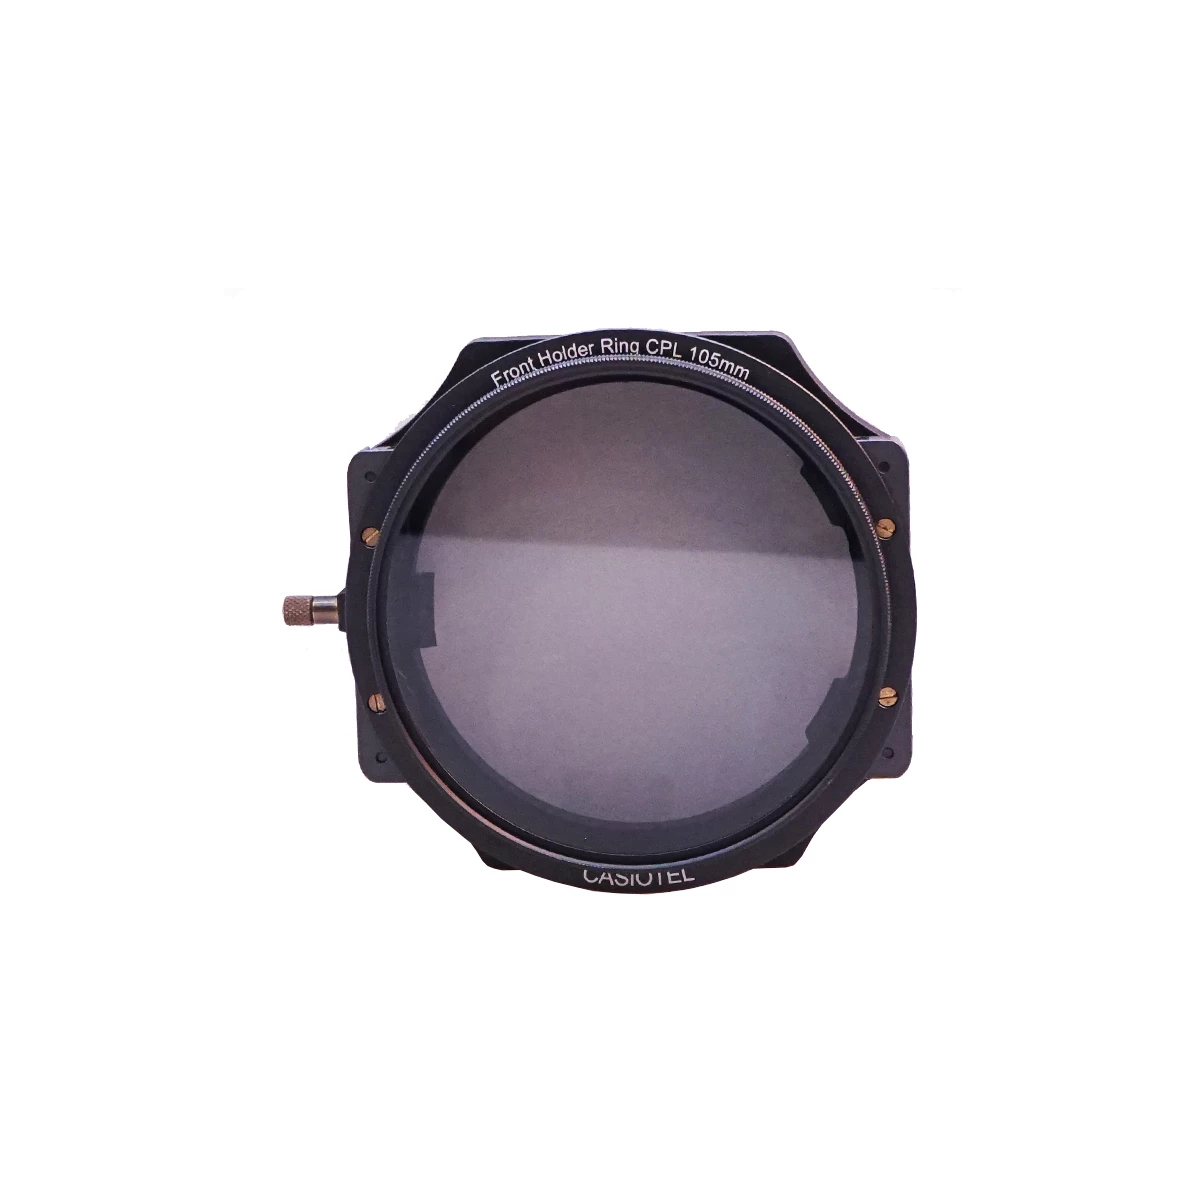 CASIOTEL FRONT HOLDER RING CPL 105MM WITH CPL  - SCORE 8